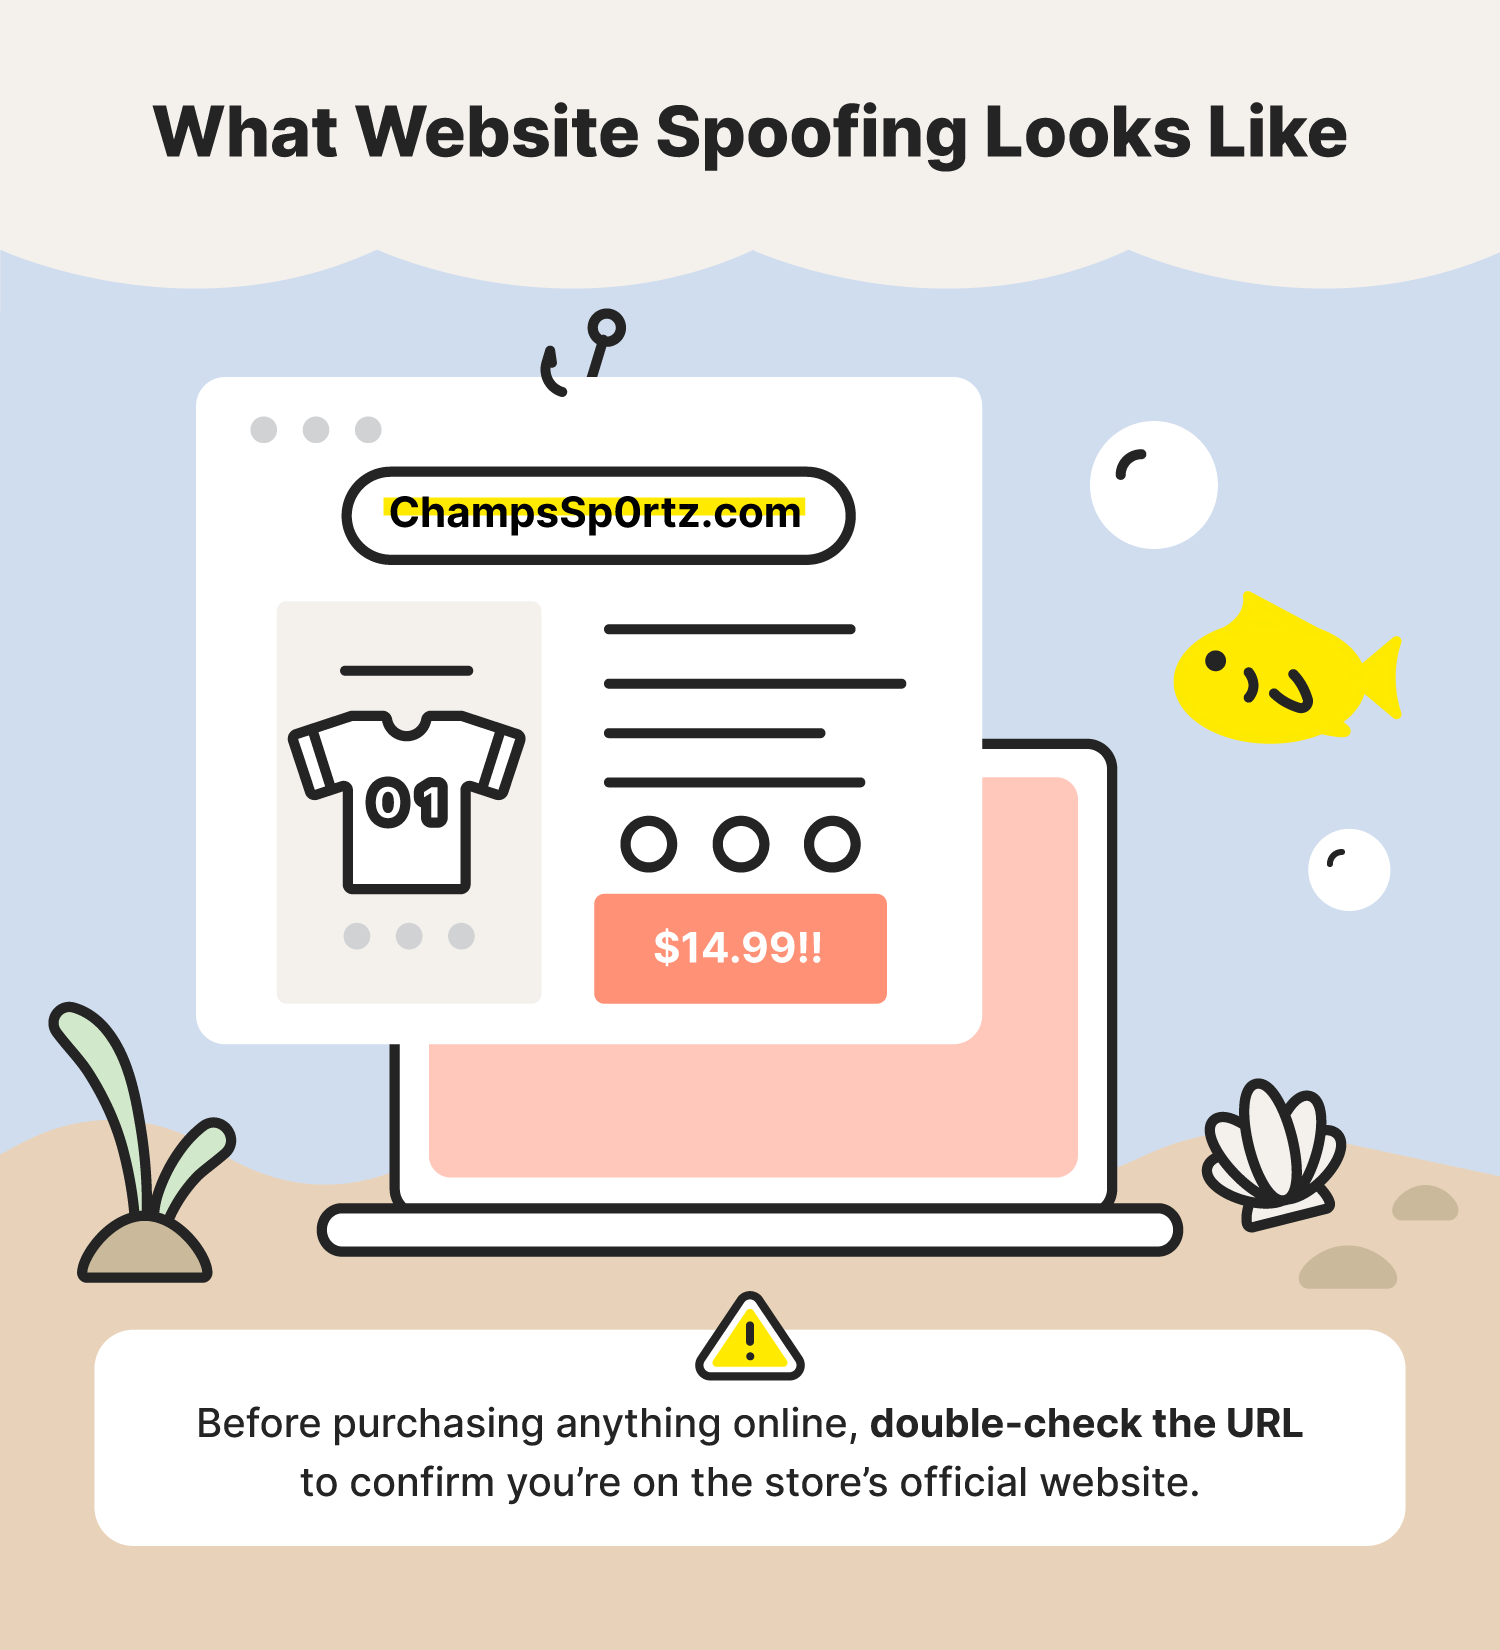 A graphic shows an example of website spoofing, one of the common types of phishing attacks.